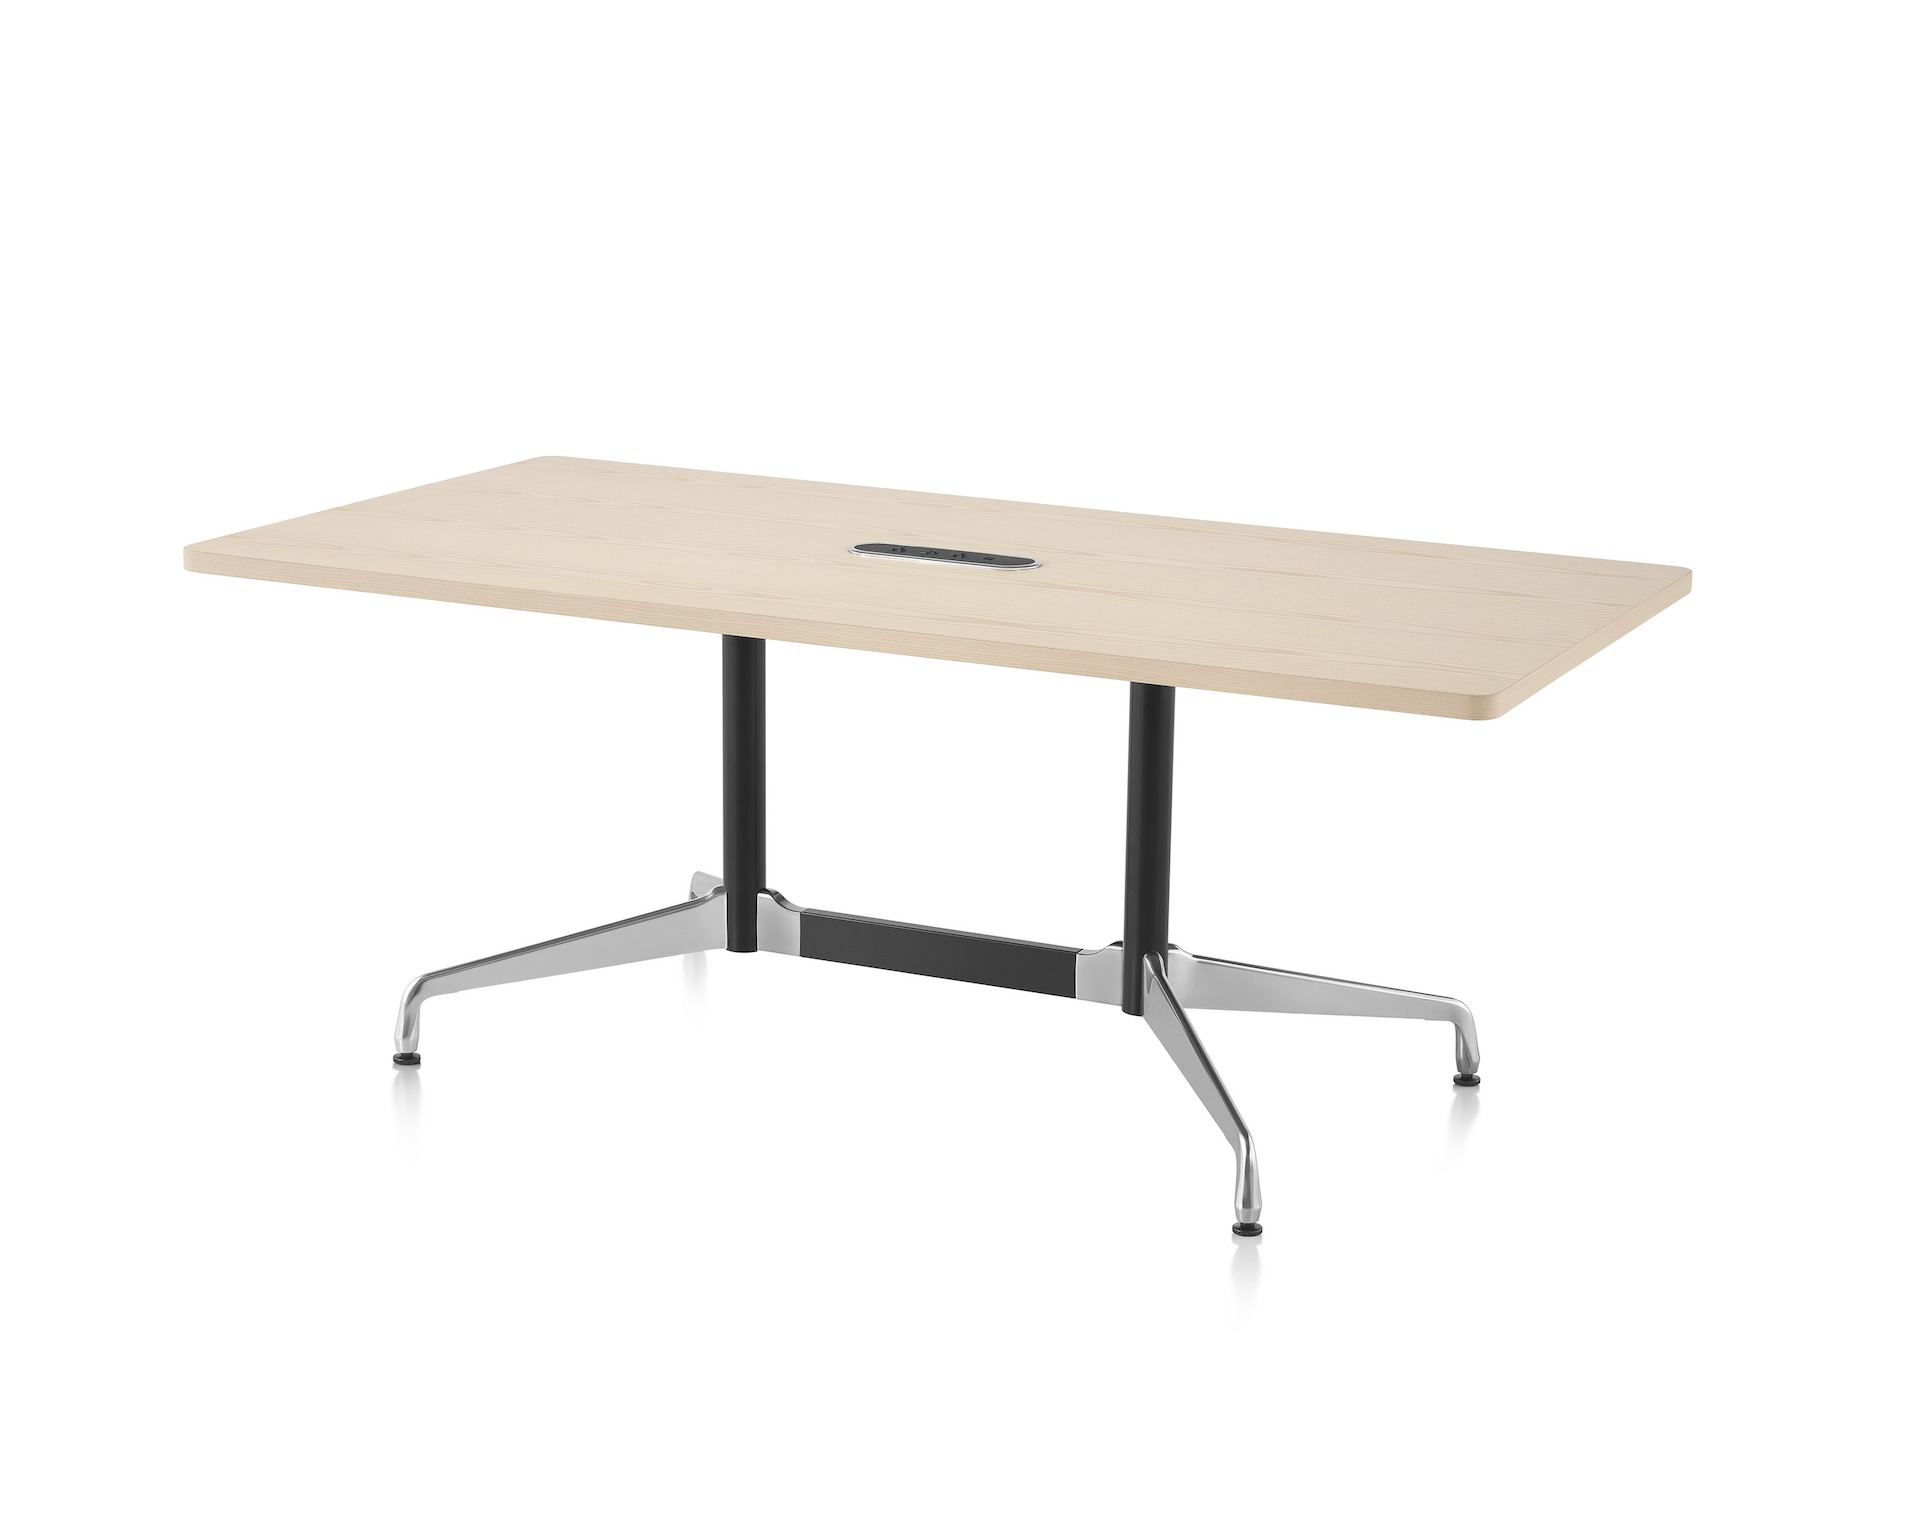 A rectangular Eames Conference Table featuring a White Ash top.